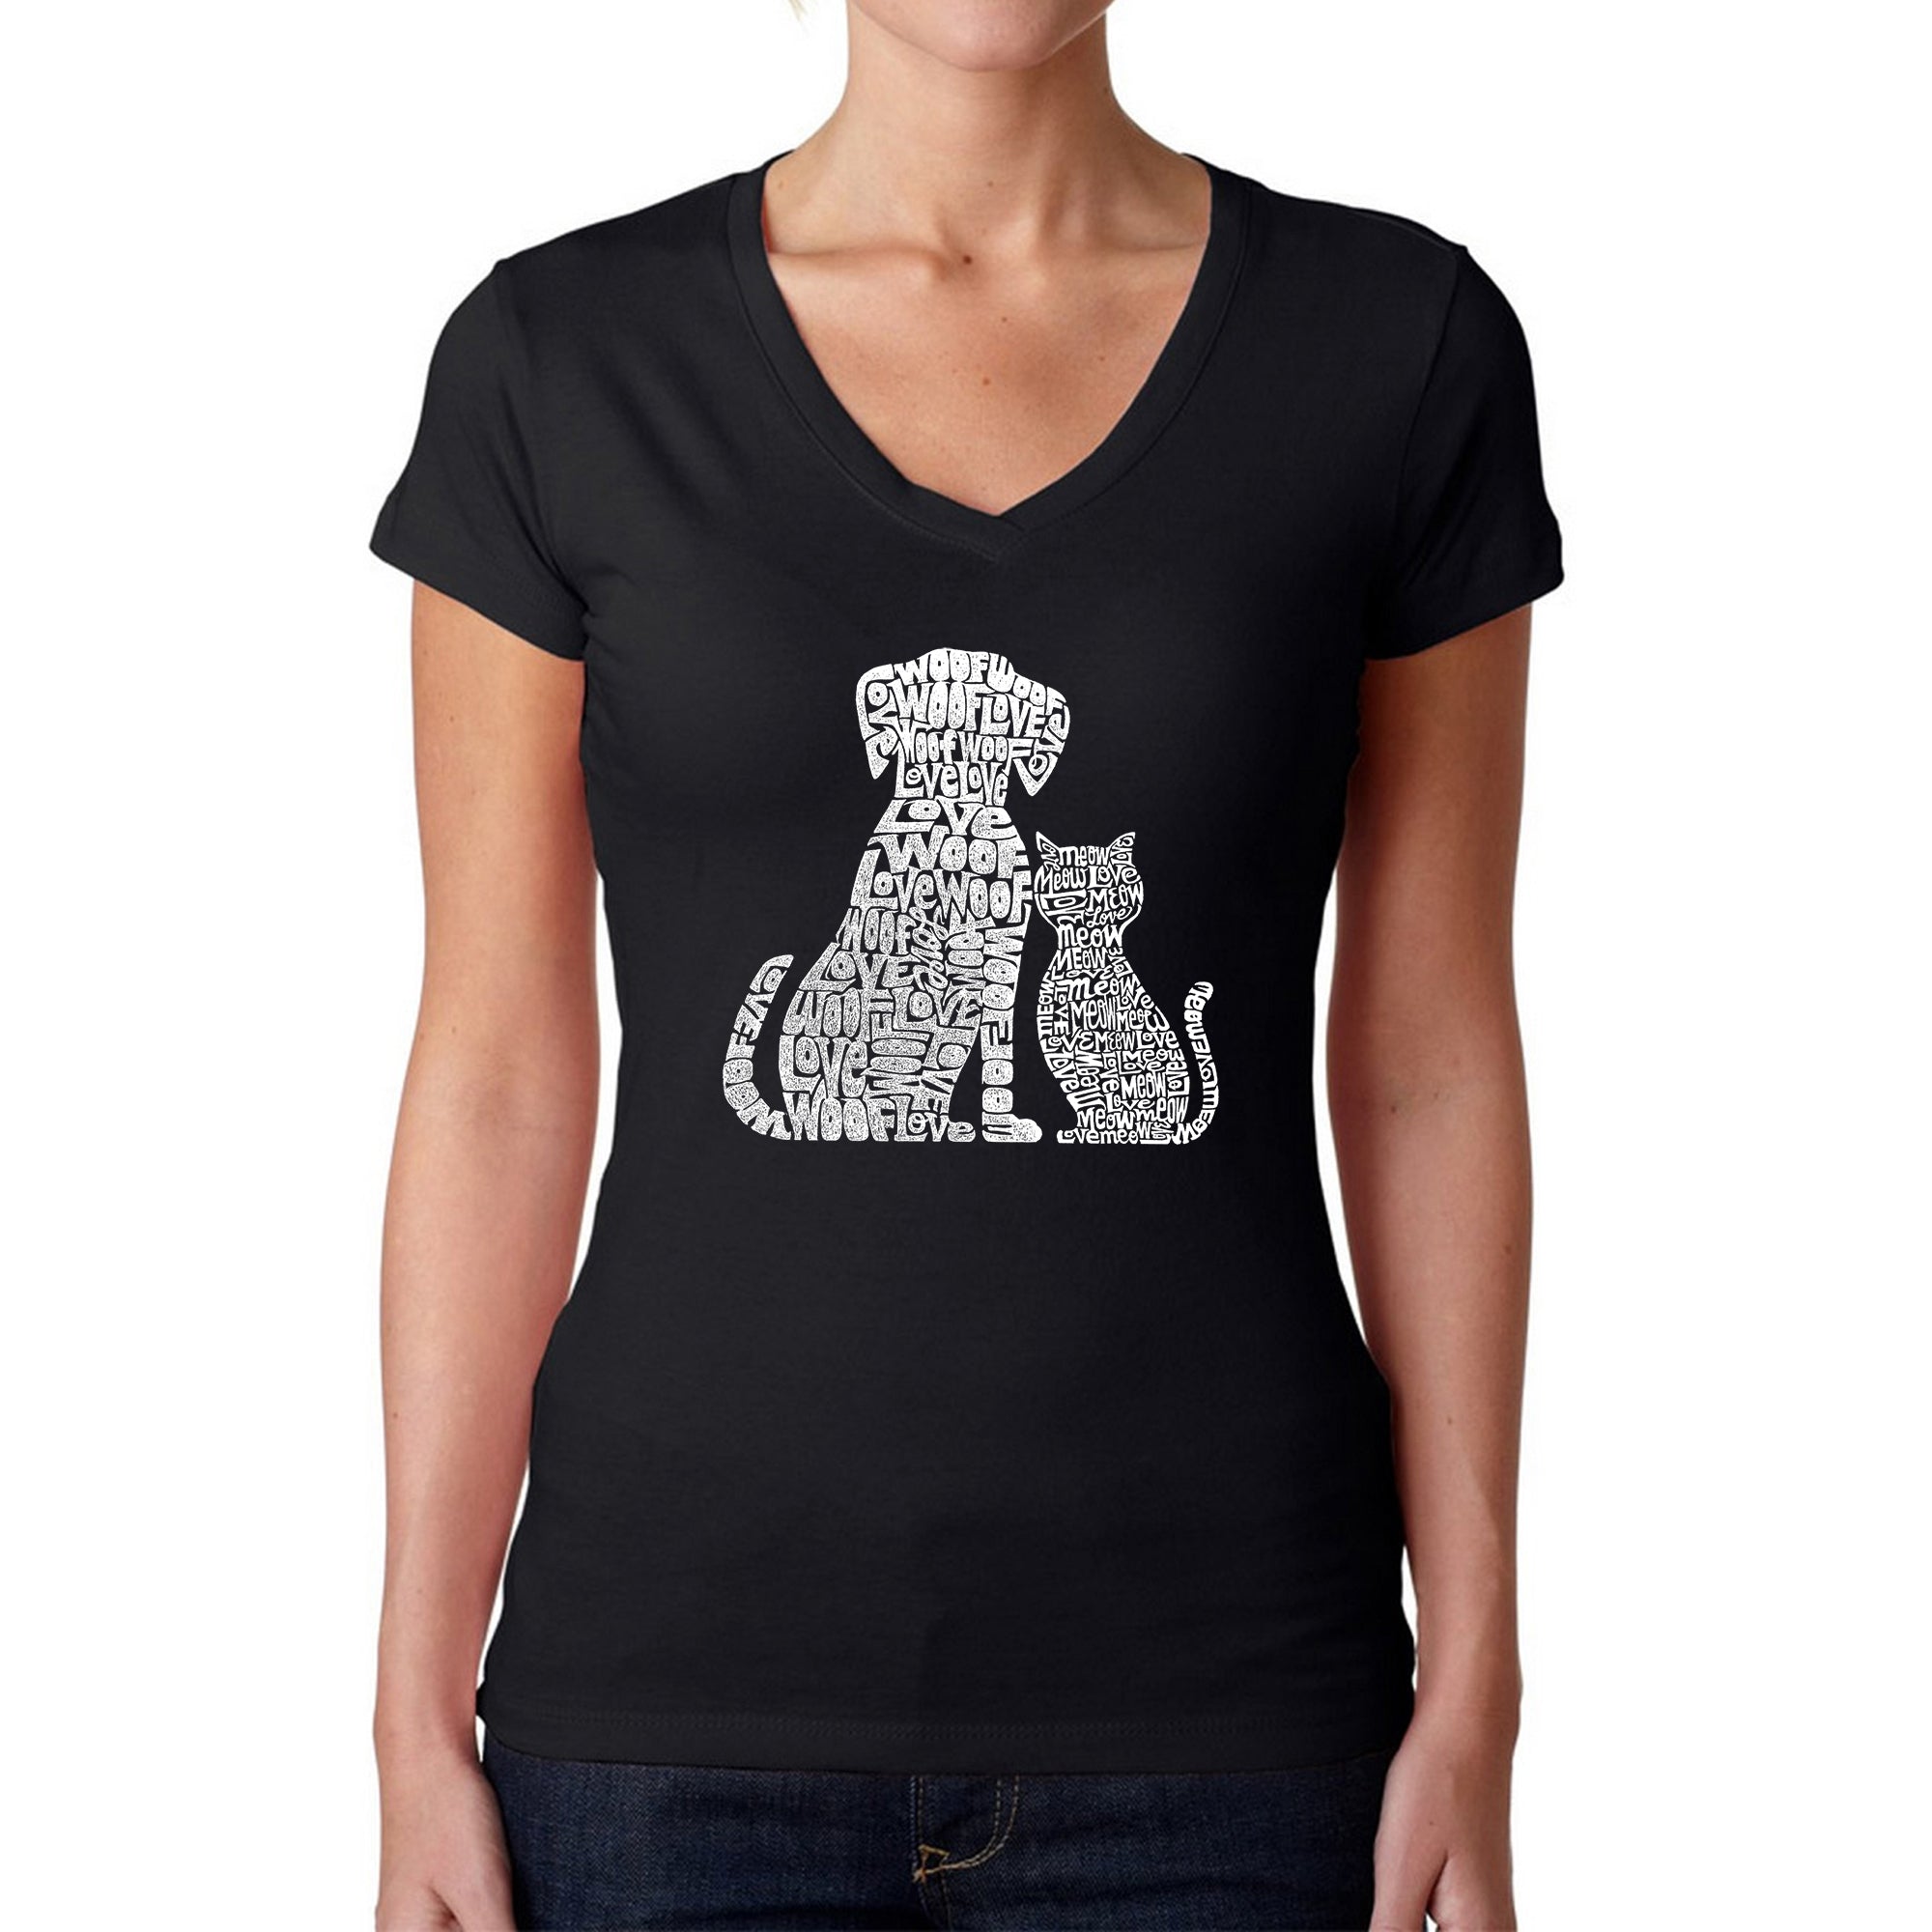 Dogs And Cats - Women's Word Art V-Neck T-Shirt - XS